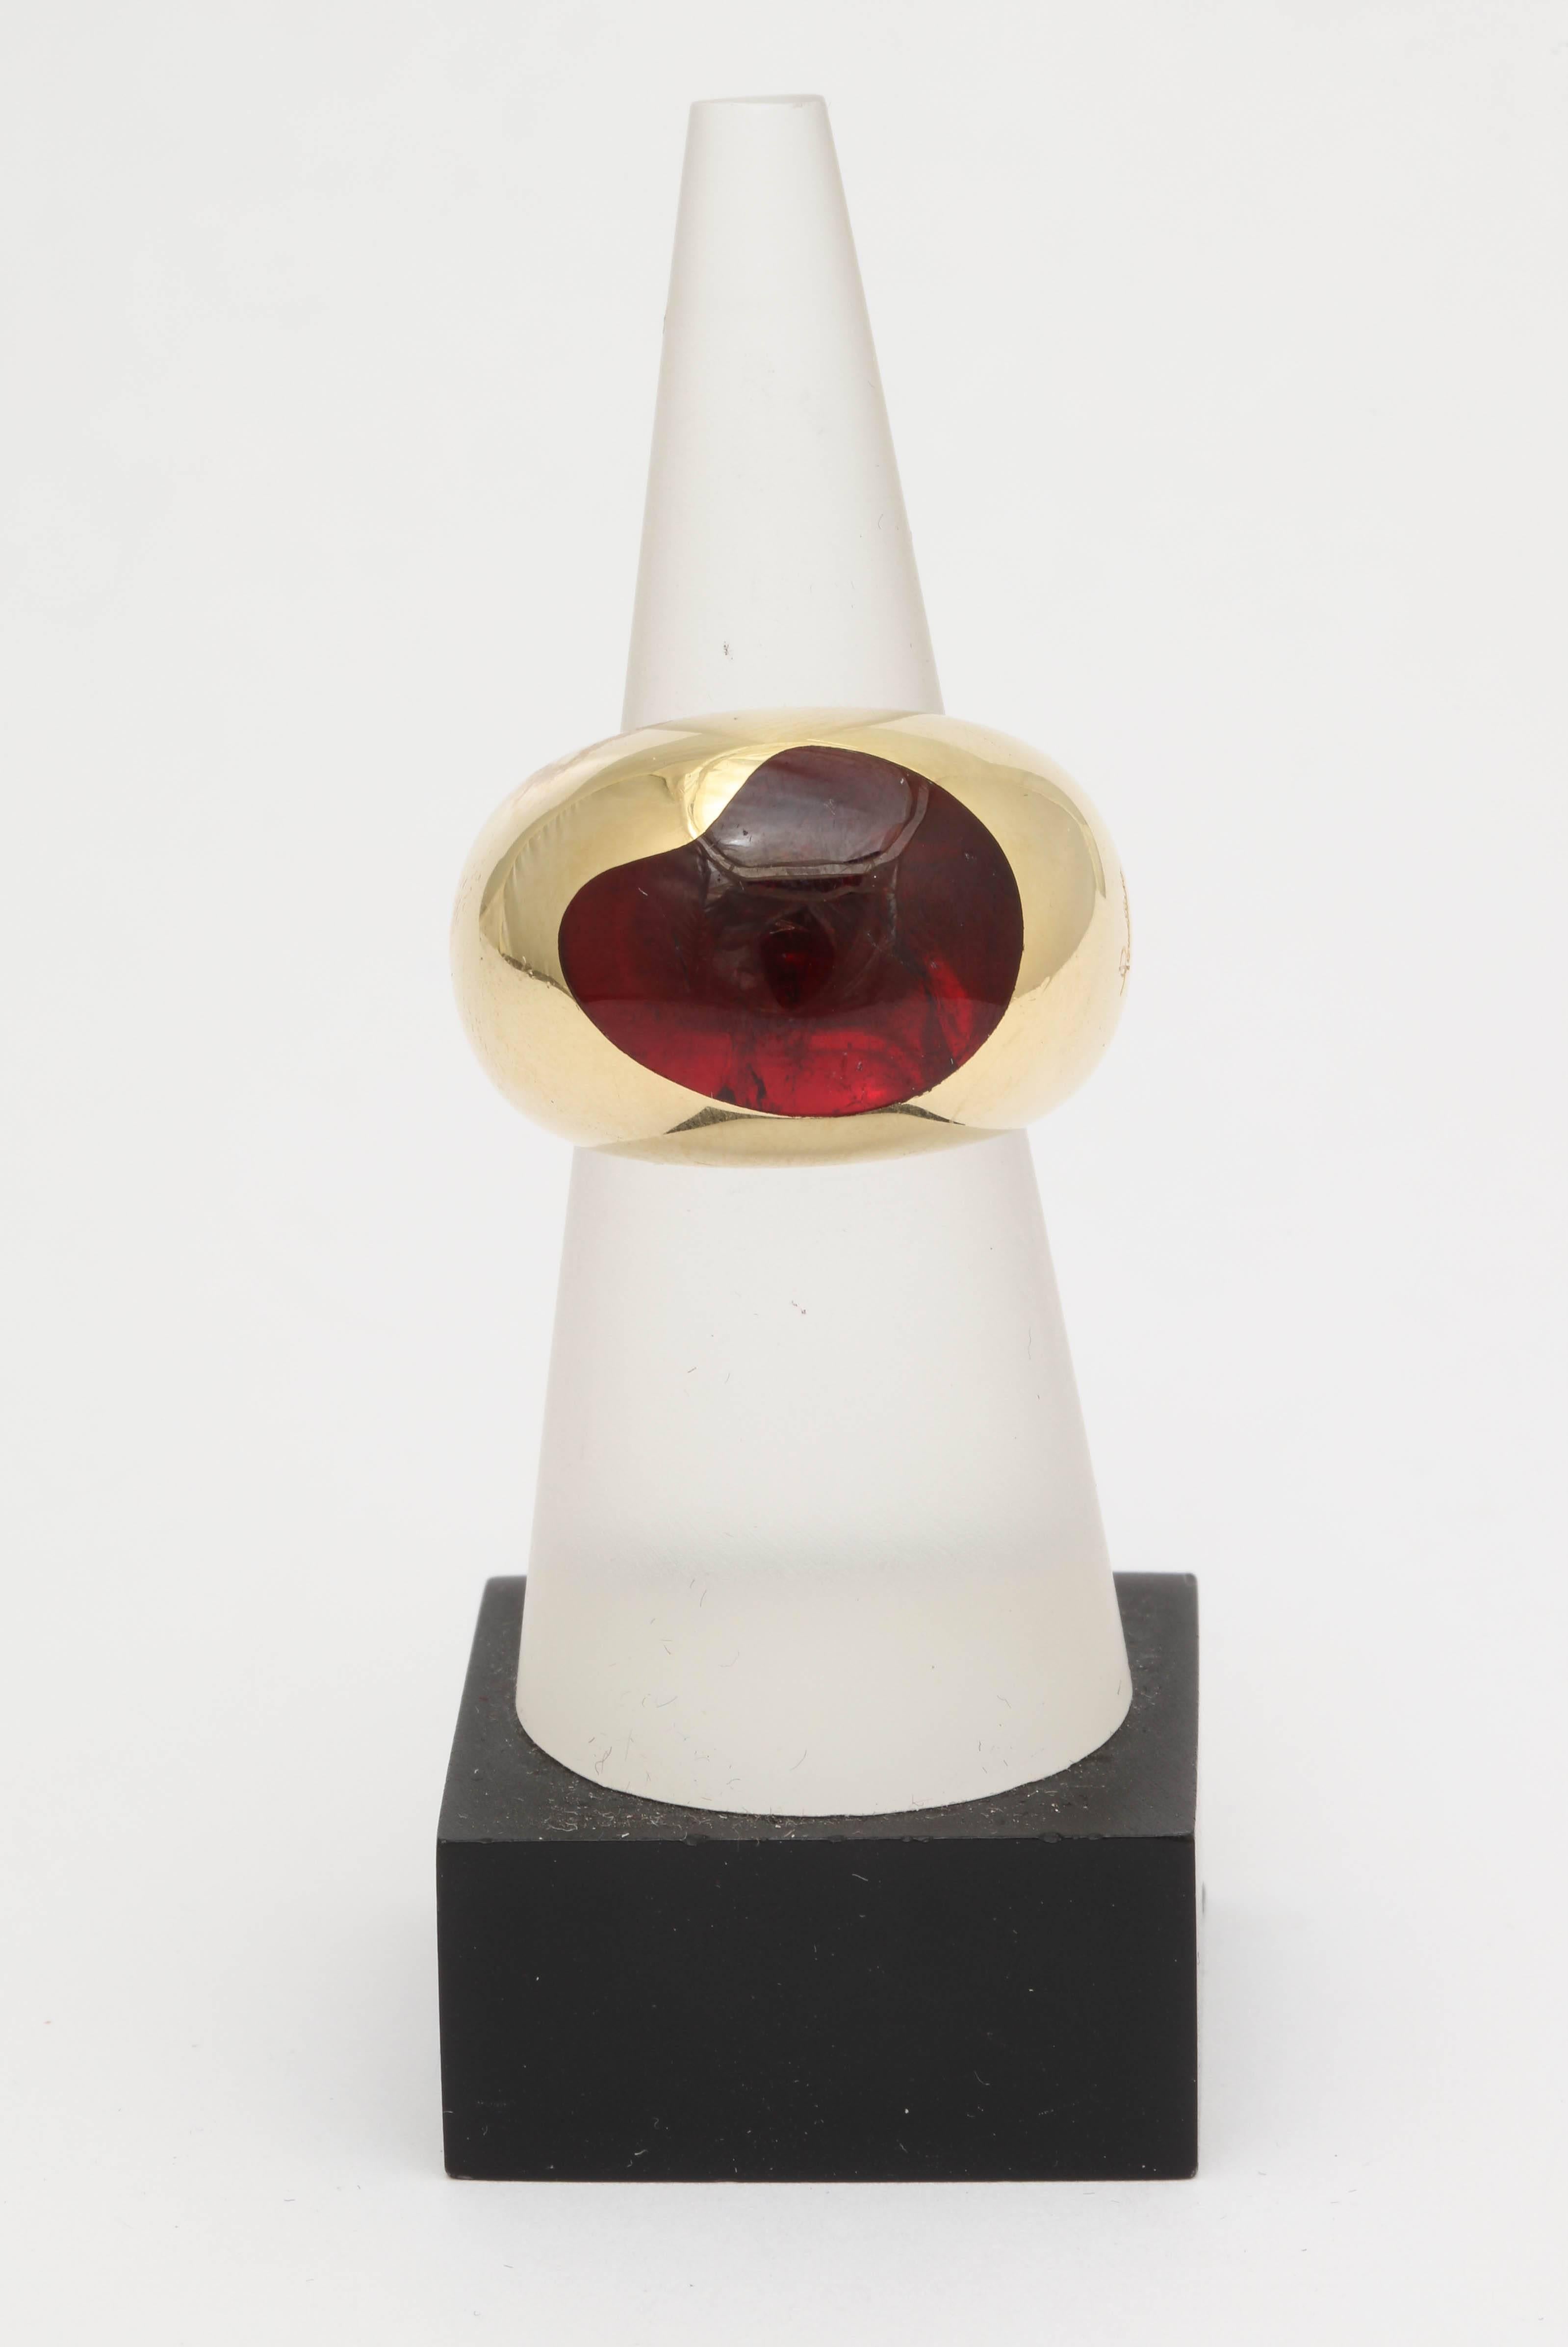 One Unisex Ring Composed Of One Unusually Aysmmetrical Shaped Beautiful Color Cabochon Garnet Heavy 18kt gold Ring. Designed By Pomellato Jewelers In The 1990's. Ring Currently Size 6.5 And May Easily Be Resized.